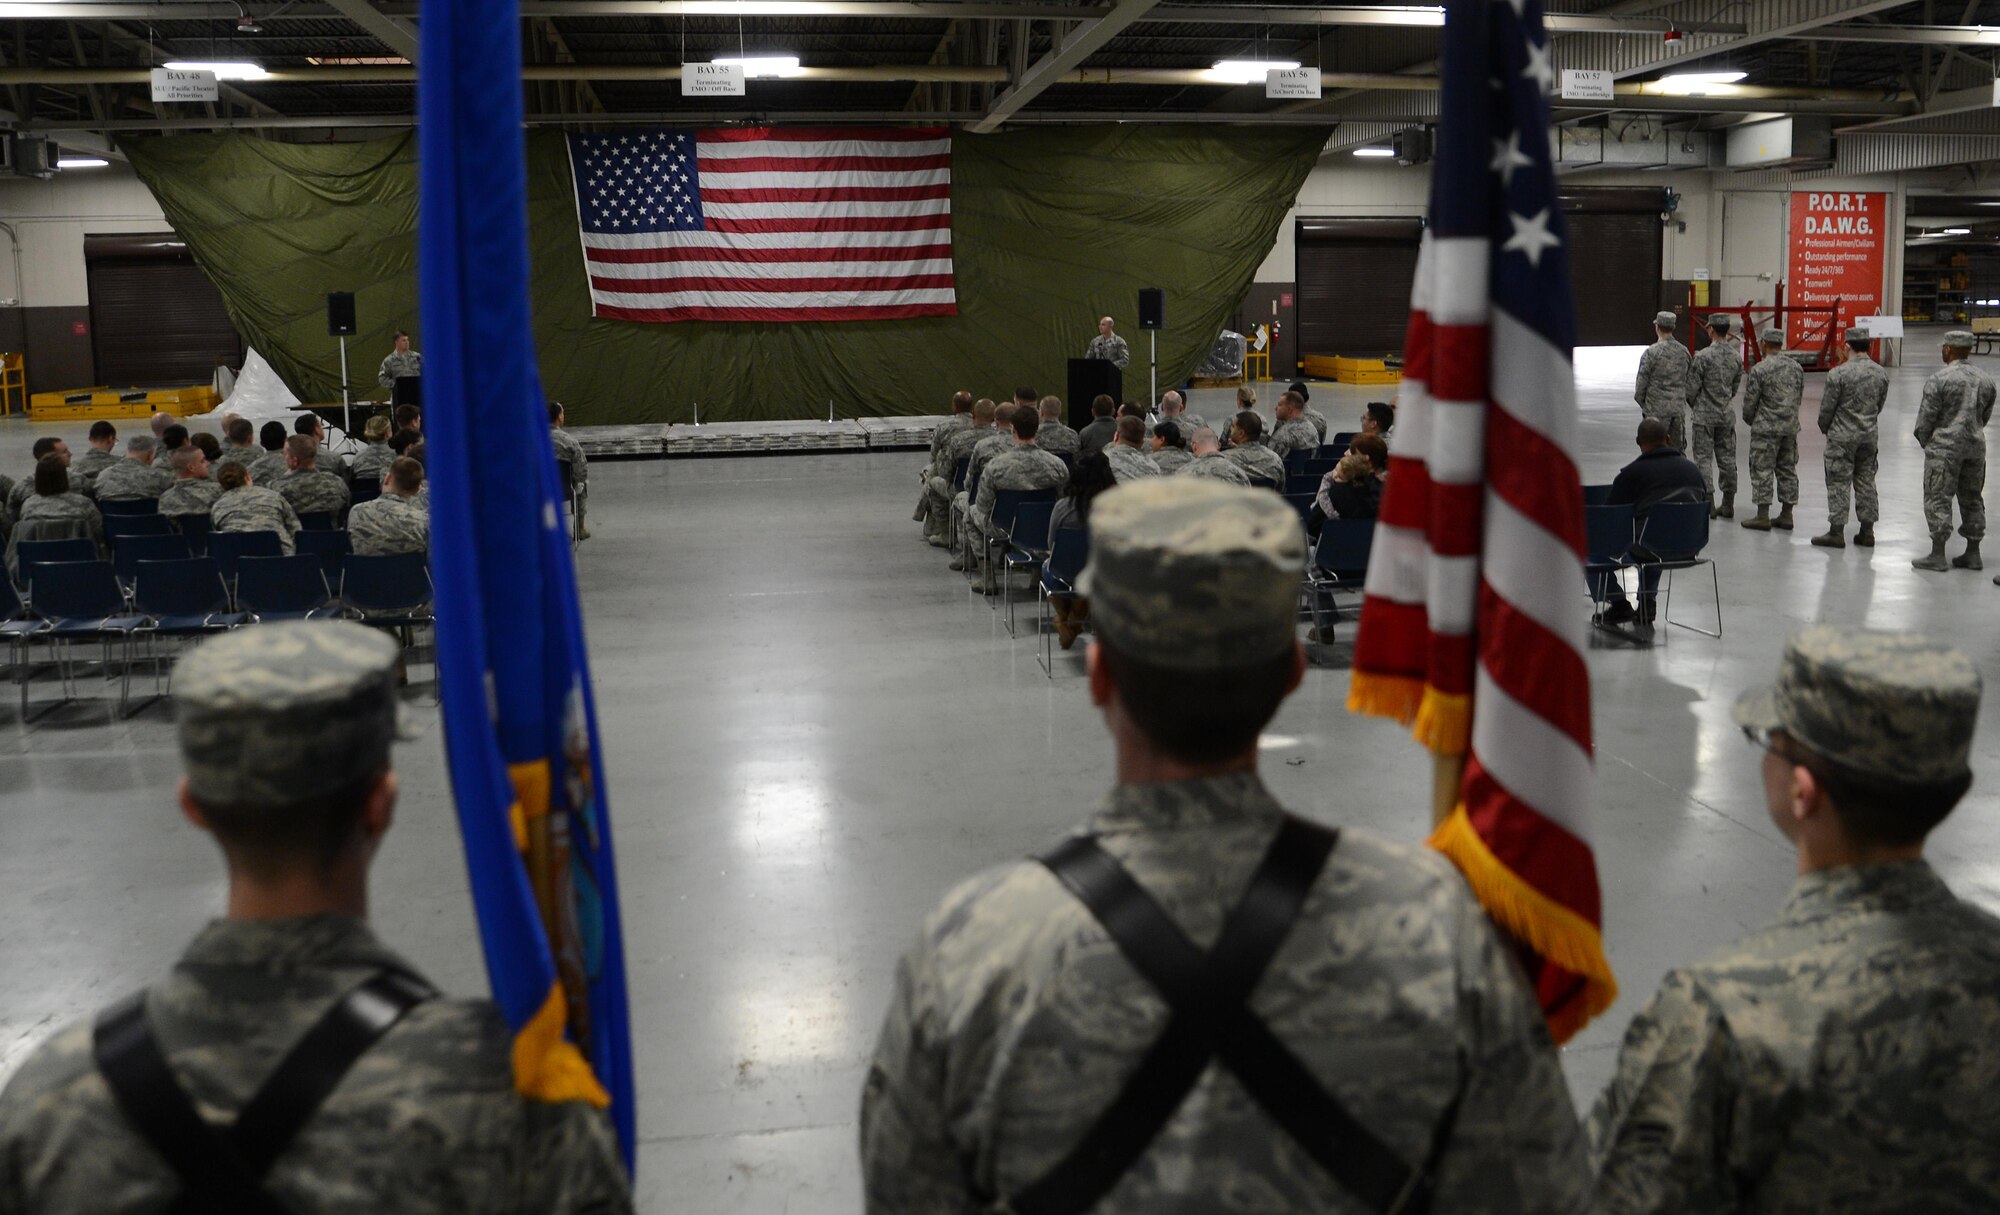 Three Airmen from the McChord Field Honor Guard stand at attention during a change or responsibility ceremony Dec. 13, 2016, at Joint Base Lewis-McChord, Wash. The ceremony was to recognize Airmen who have completed their service in the McChord Field Honor Guard and to initiate their replacements. (U.S. Air Force photo/Senior Airman Jacob Jimenez)     